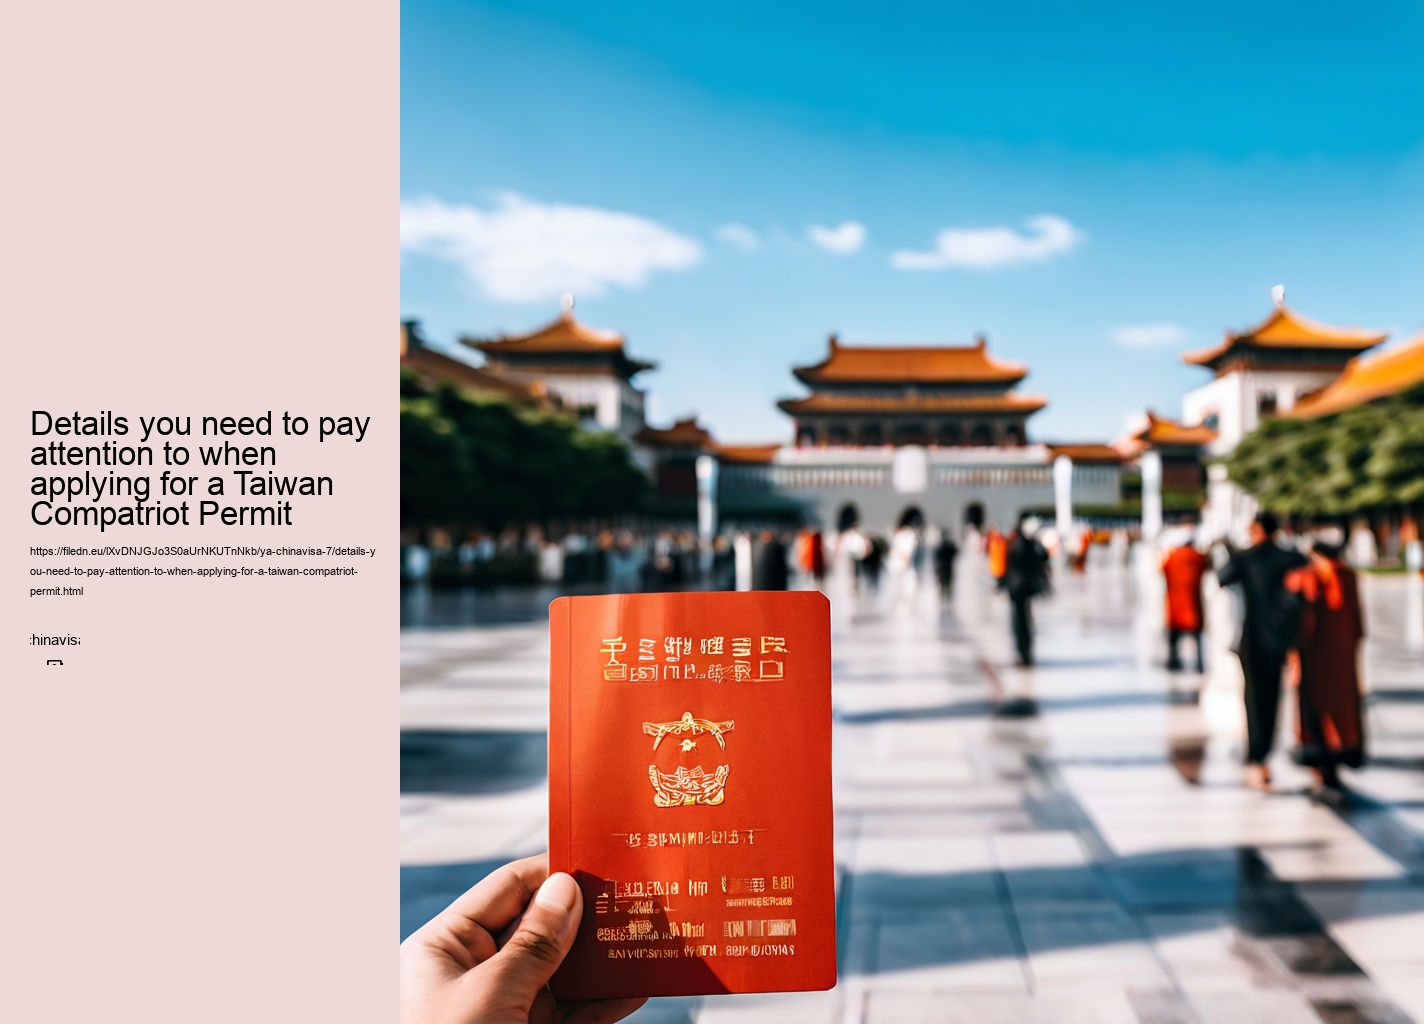 Details you need to pay attention to when applying for a Taiwan Compatriot Permit